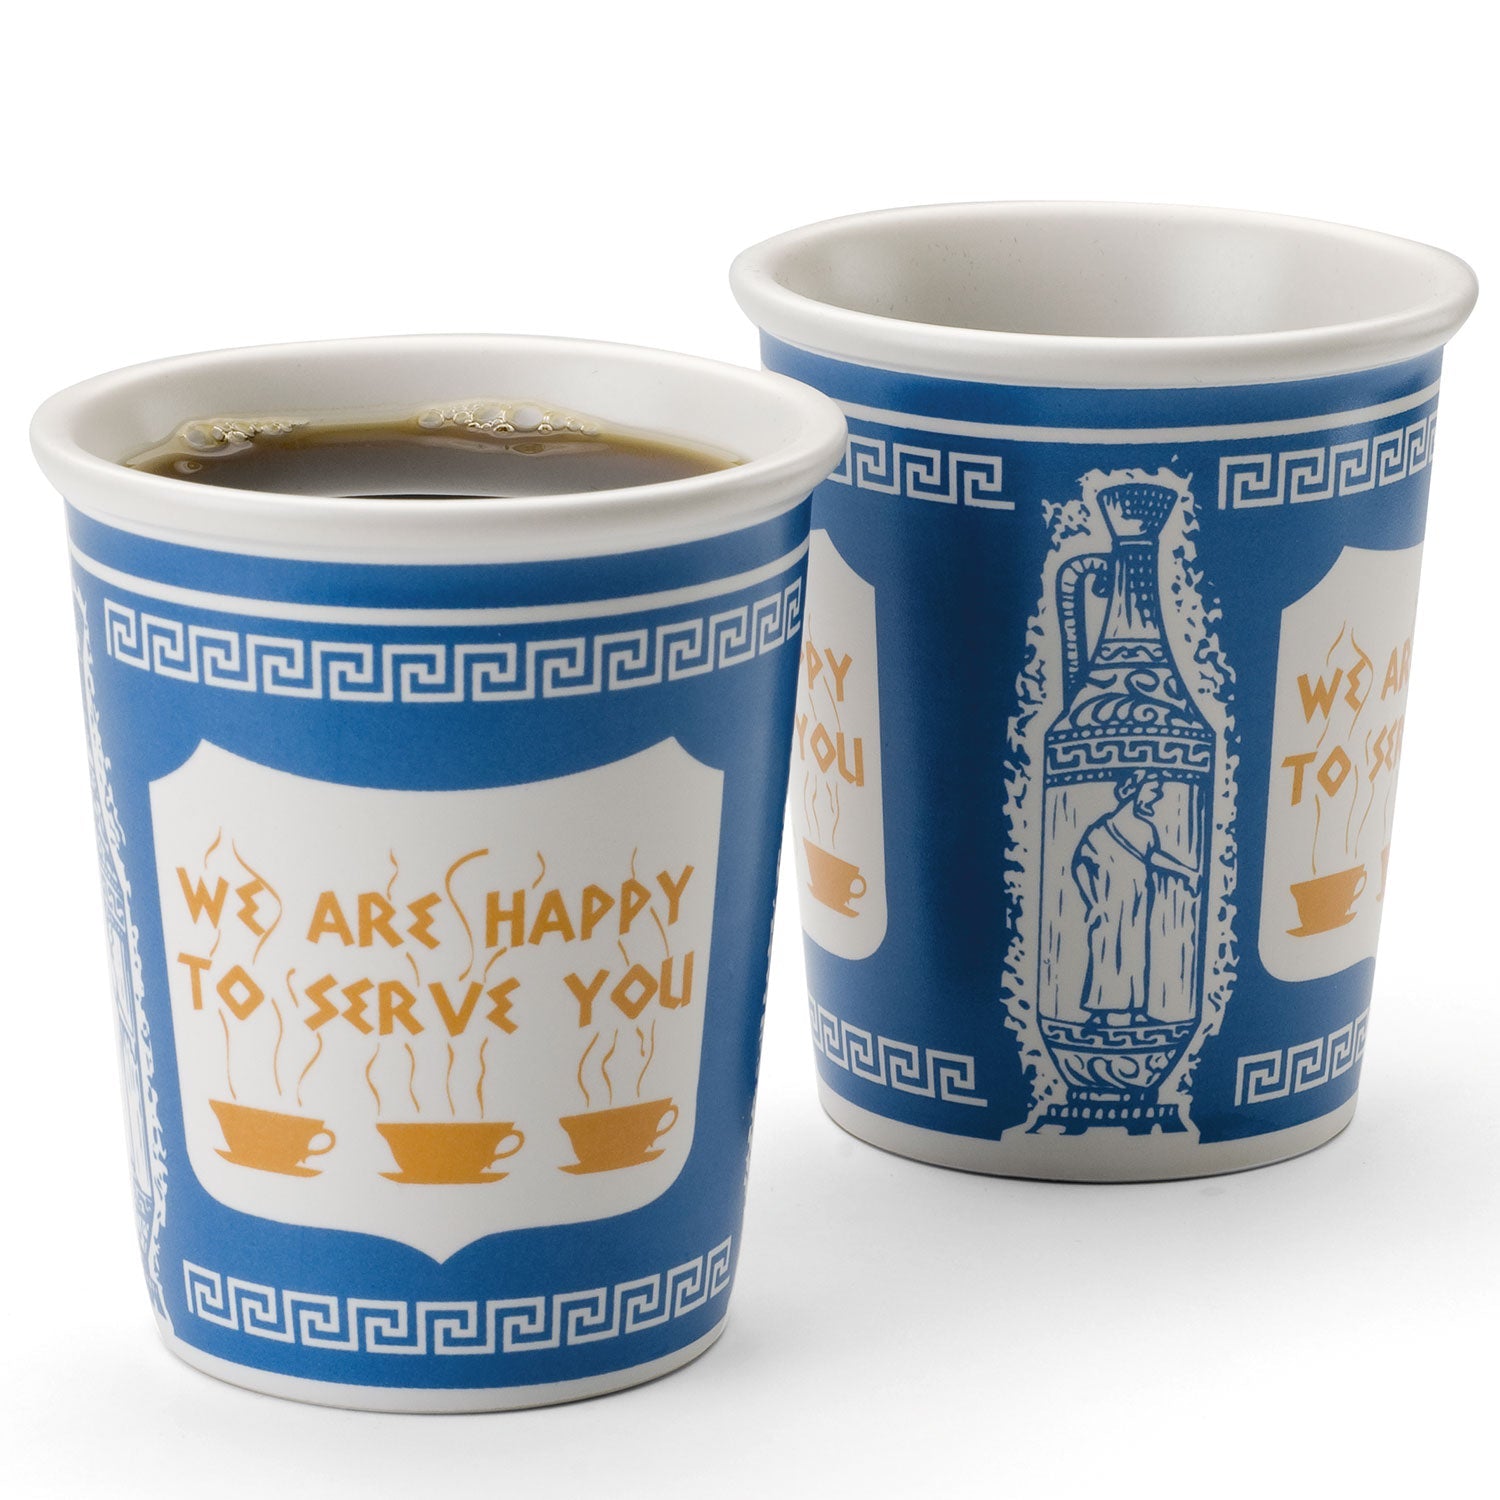  Exceptionlab Inc. 0-Ounce Ceramic Cup We are happy to